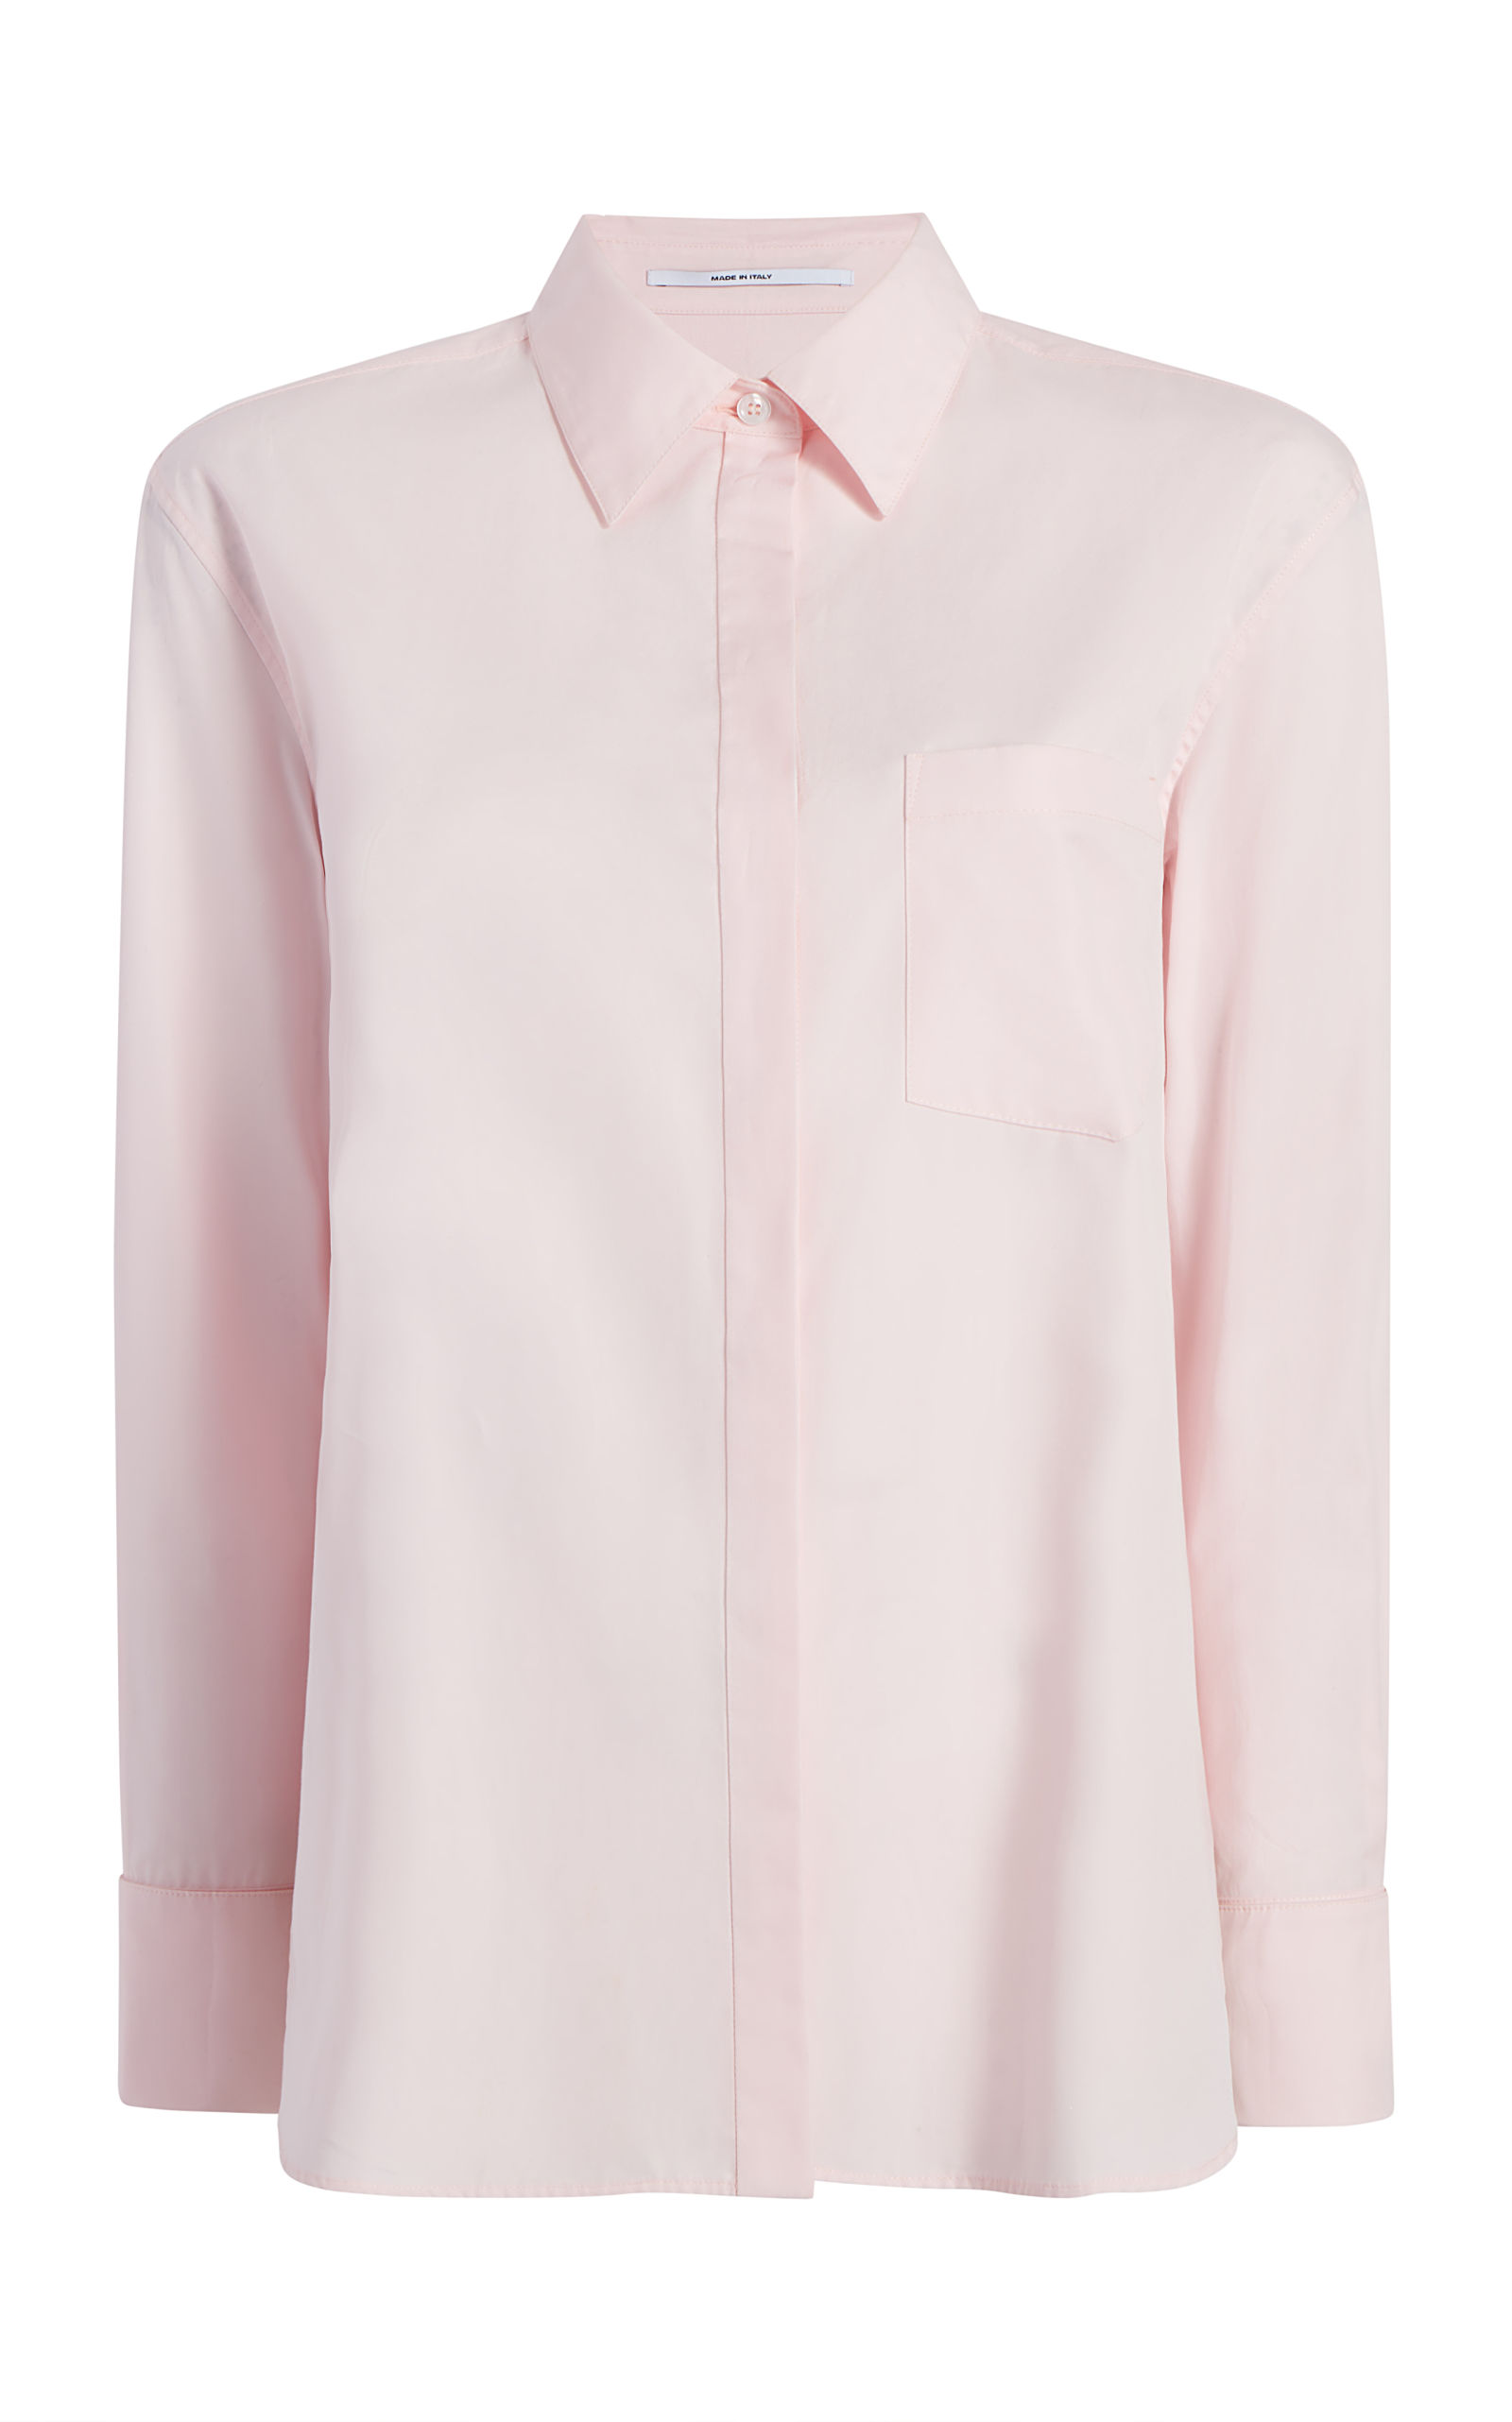 MENS SHIRT WITH GOLD CUFFLINK PALE PINK A123BL043-CO-PPK